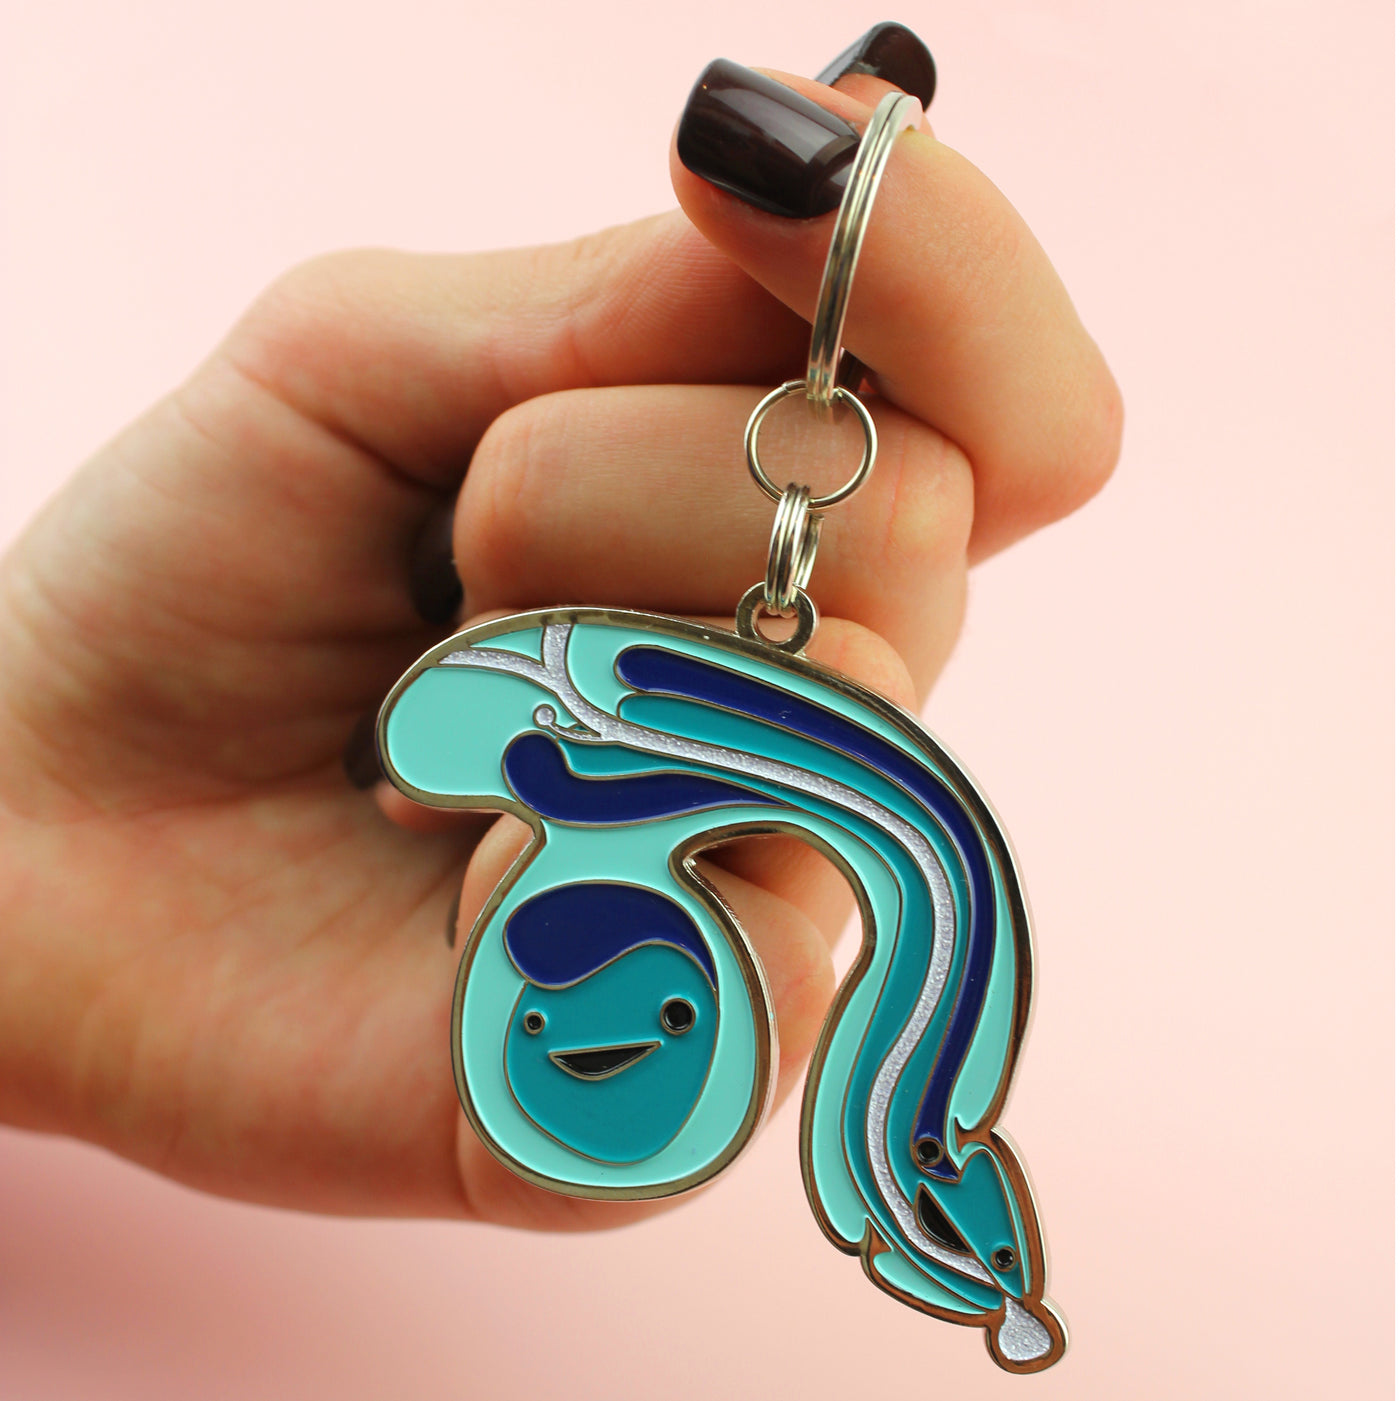 Sparkly Penis + Testicle Keychain - Glitter Penis Keychain Funny Urology Gift